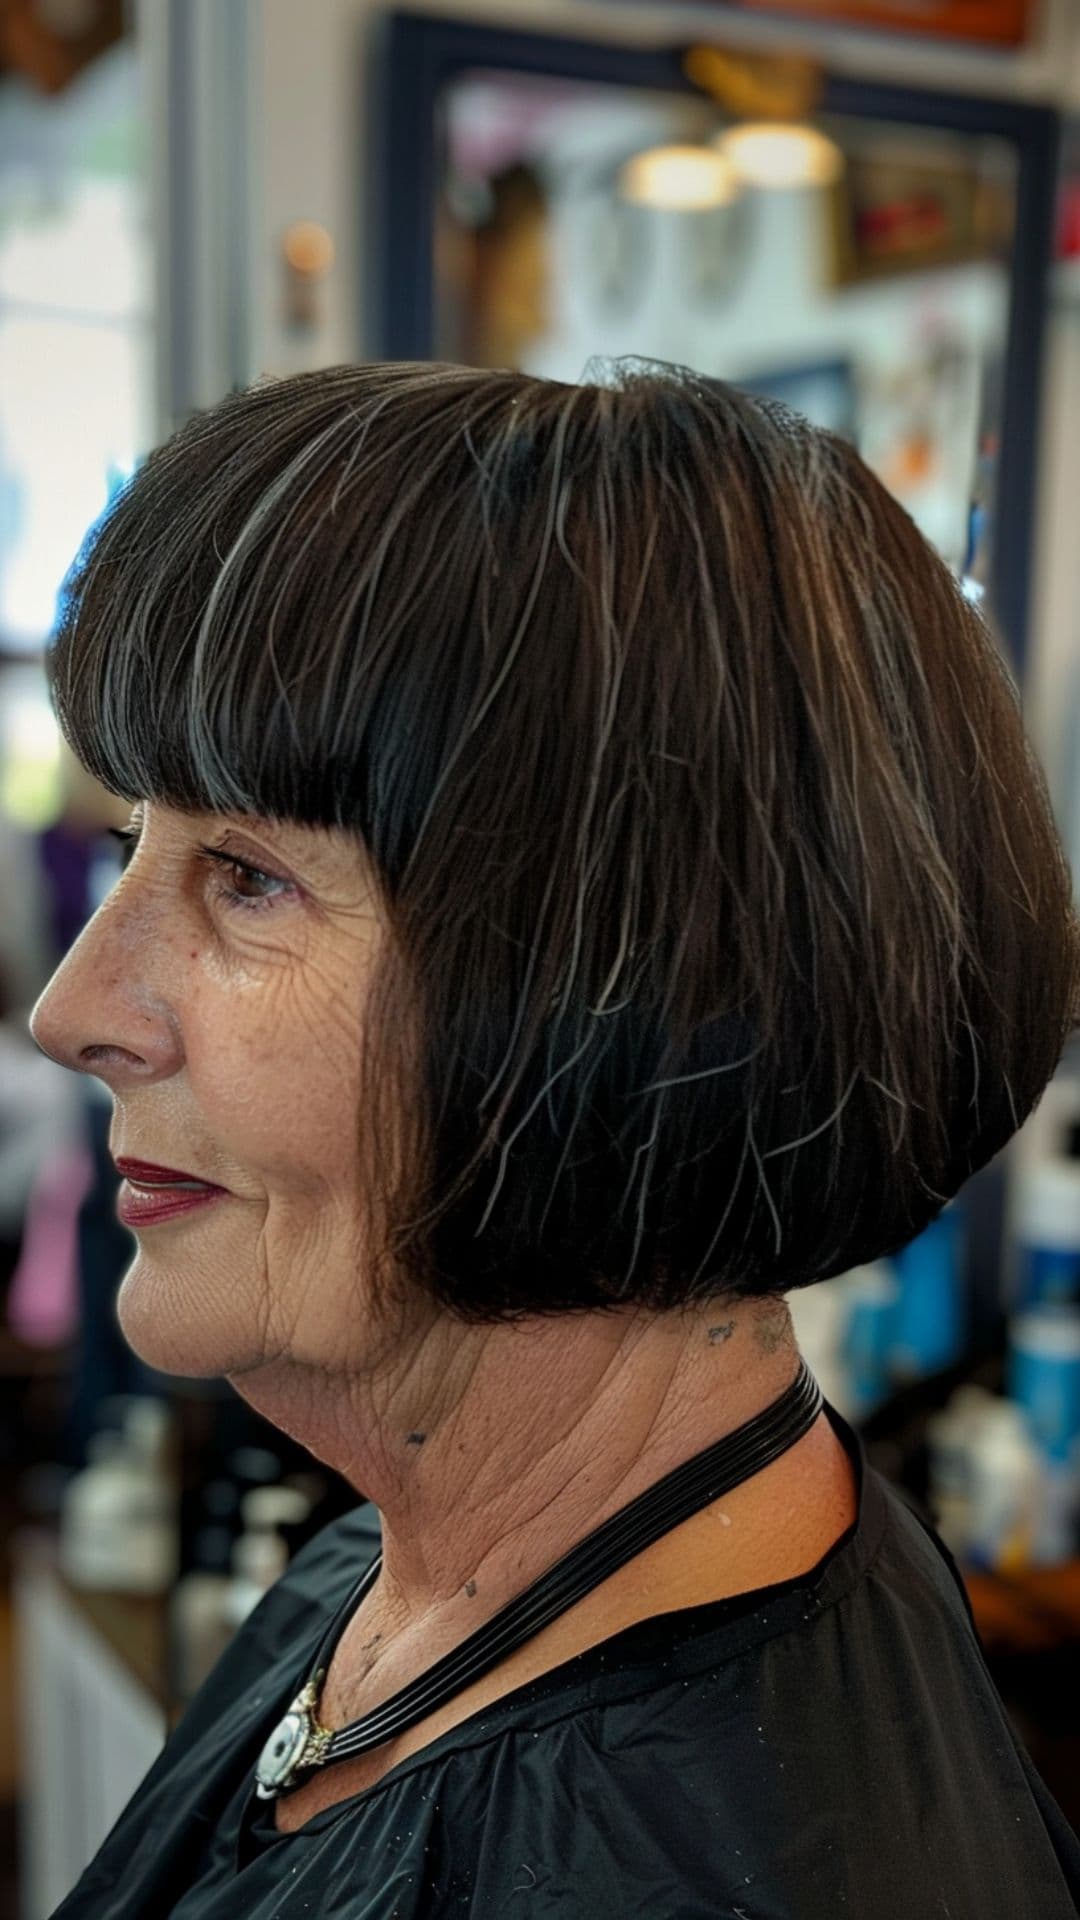 An old woman modelling a blunt bangs.